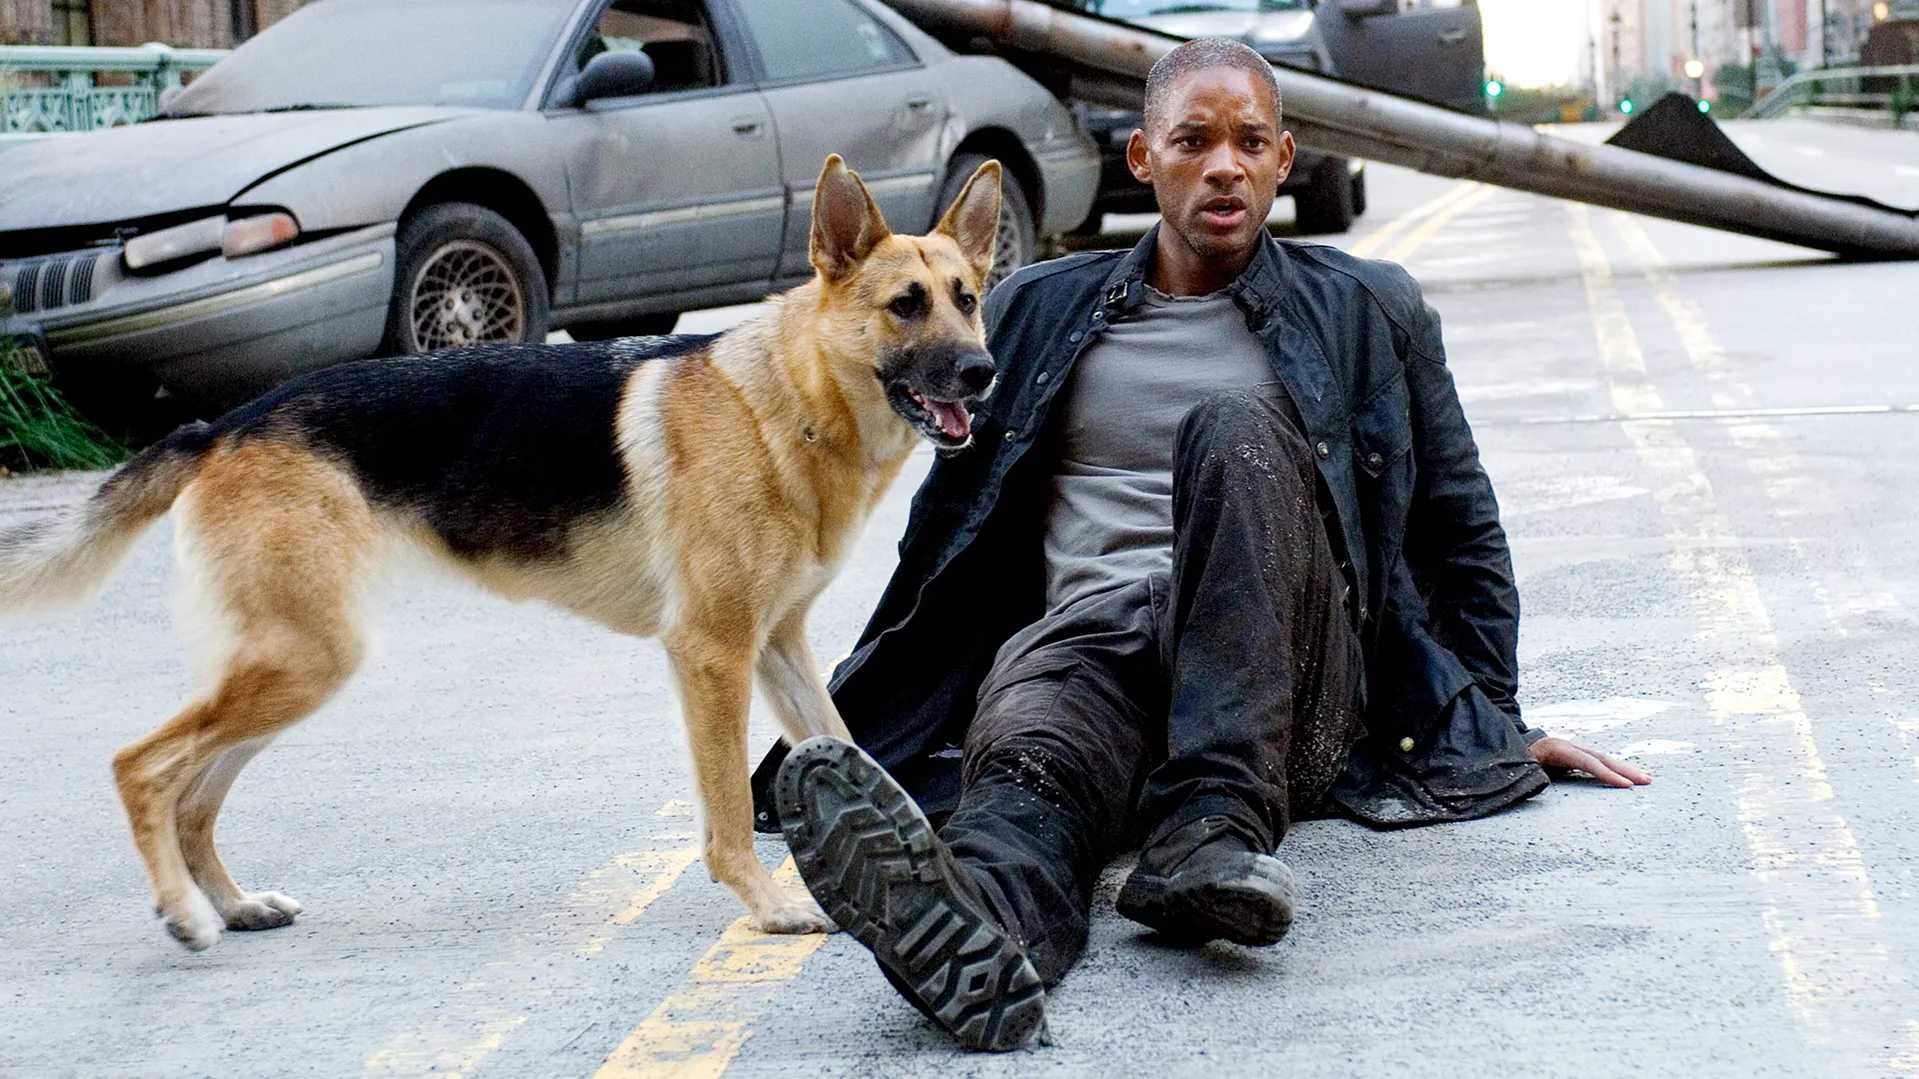 Will Smith opens up about I Am Legend 2: The actor confirms sequel and his return to the iconic role